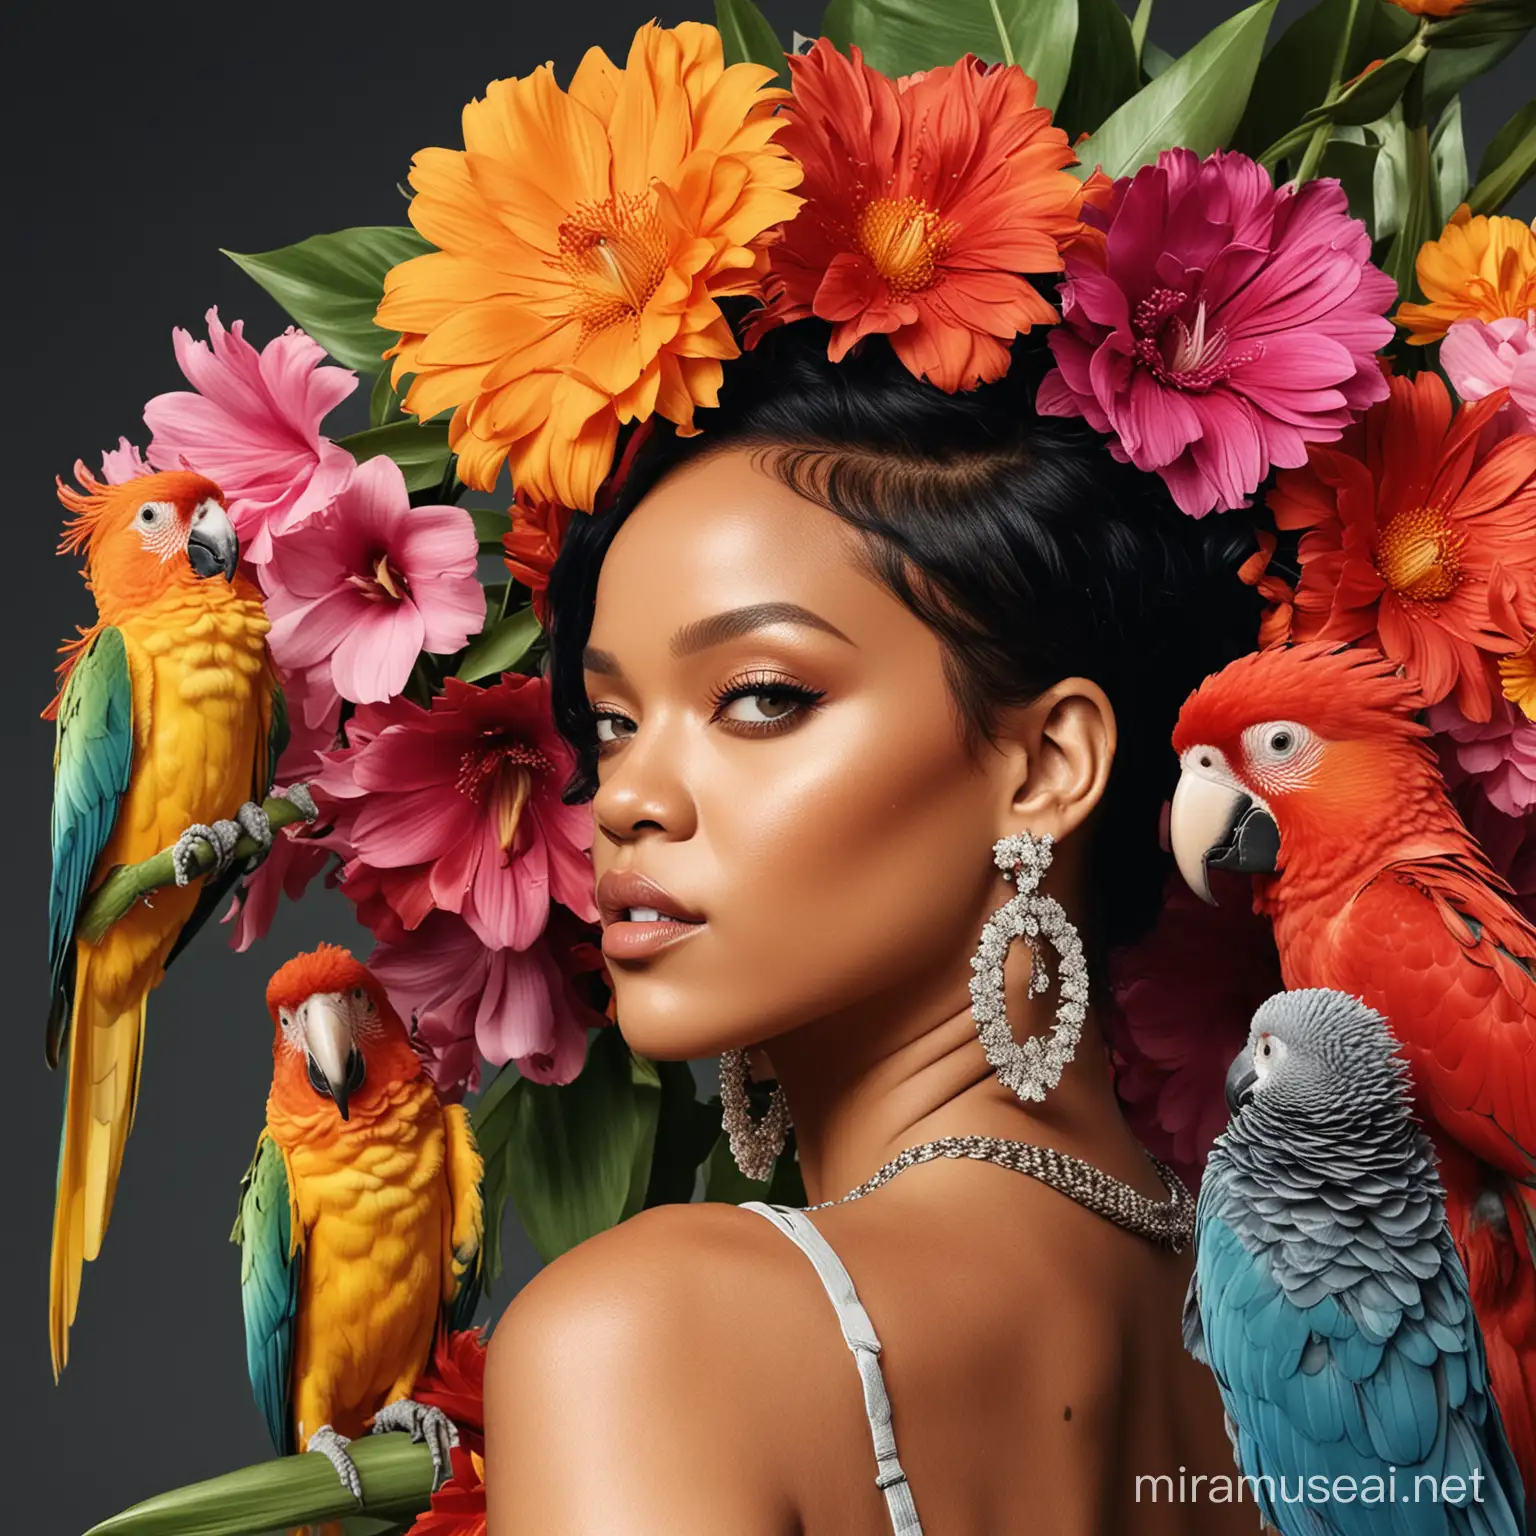 Rihannas Profile with Majestic Parrots and Giant Flowers